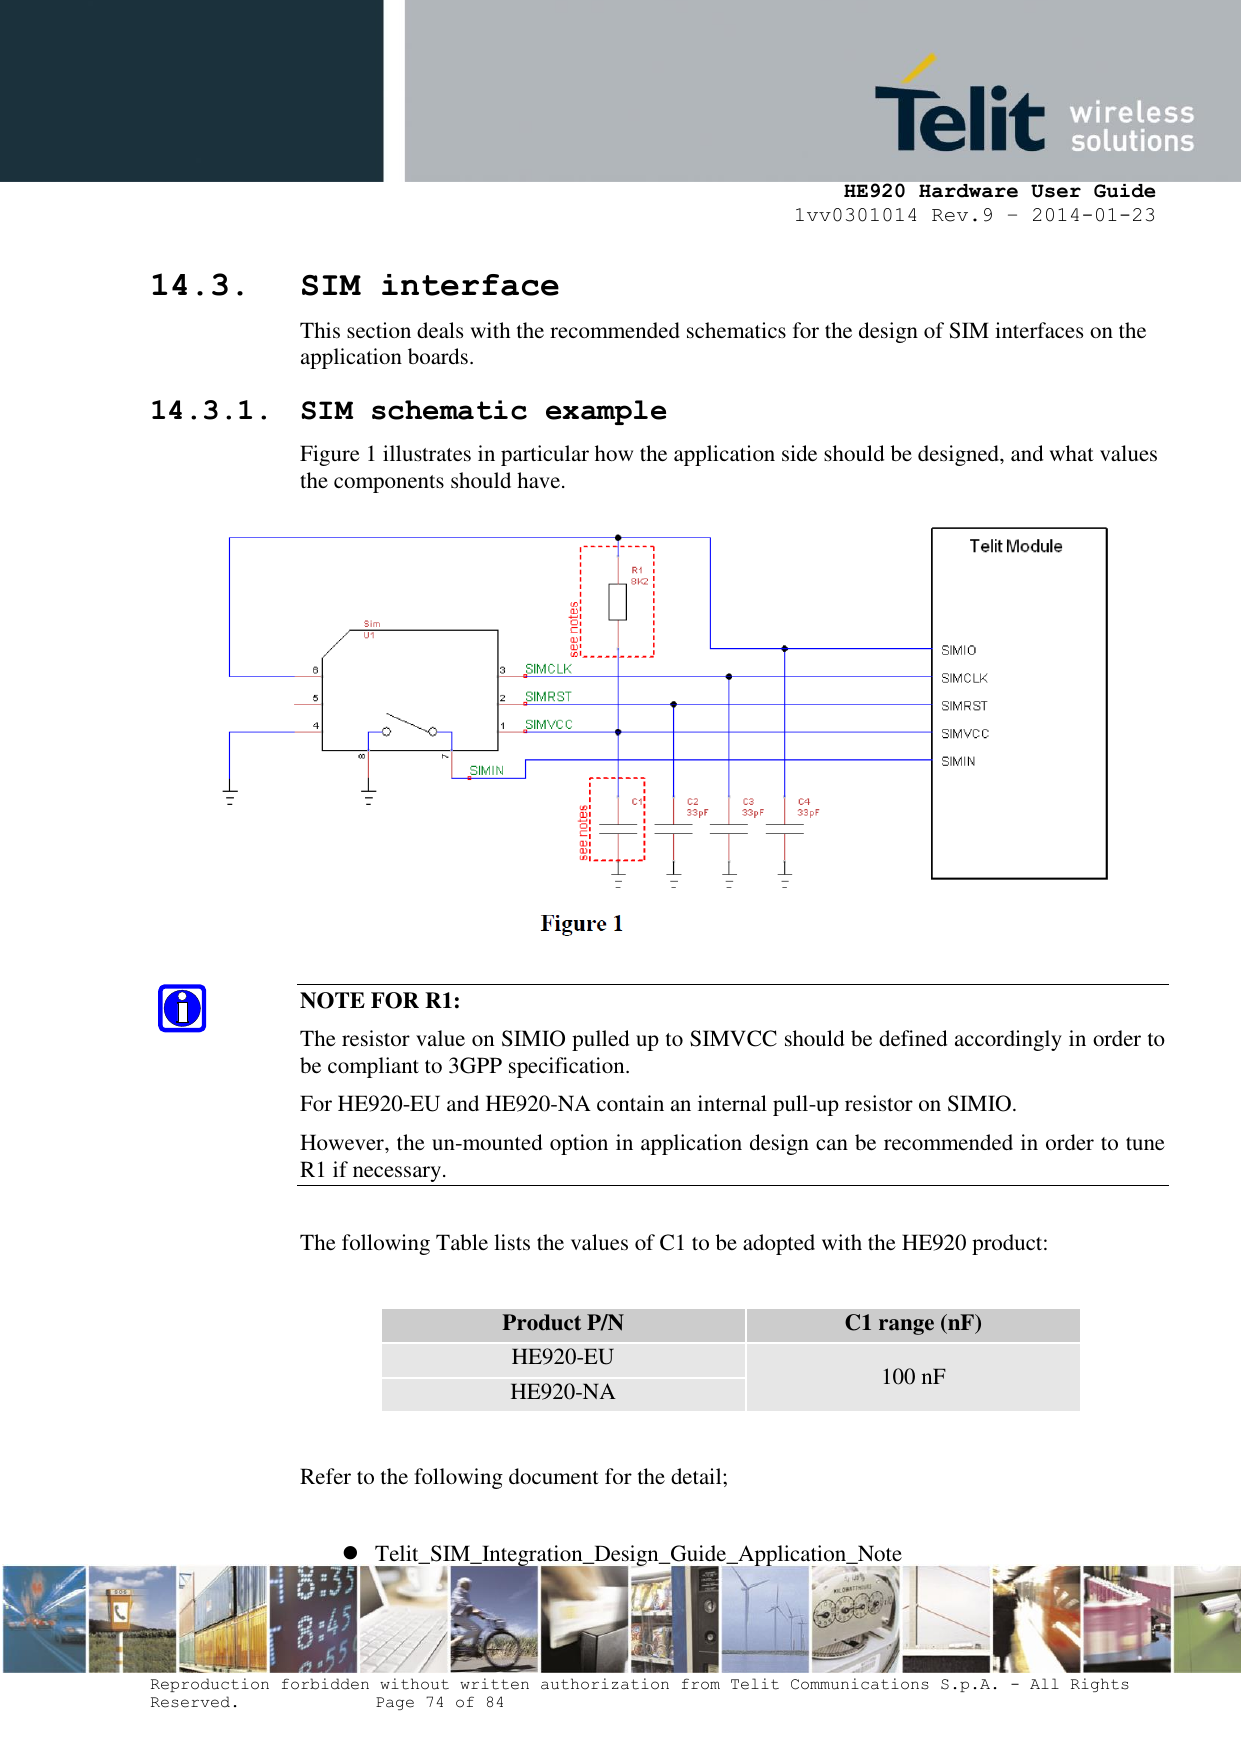     HE920 Hardware User Guide 1vv0301014 Rev.9 – 2014-01-23 Reproduction forbidden without written authorization from Telit Communications S.p.A. - All Rights Reserved.    Page 74 of 84  14.3. SIM interface This section deals with the recommended schematics for the design of SIM interfaces on the application boards. 14.3.1. SIM schematic example Figure 1 illustrates in particular how the application side should be designed, and what values the components should have.   NOTE FOR R1: The resistor value on SIMIO pulled up to SIMVCC should be defined accordingly in order to be compliant to 3GPP specification. For HE920-EU and HE920-NA contain an internal pull-up resistor on SIMIO. However, the un-mounted option in application design can be recommended in order to tune R1 if necessary.   The following Table lists the values of C1 to be adopted with the HE920 product:  Product P/N C1 range (nF) HE920-EU 100 nF HE920-NA  Refer to the following document for the detail;   Telit_SIM_Integration_Design_Guide_Application_Note 